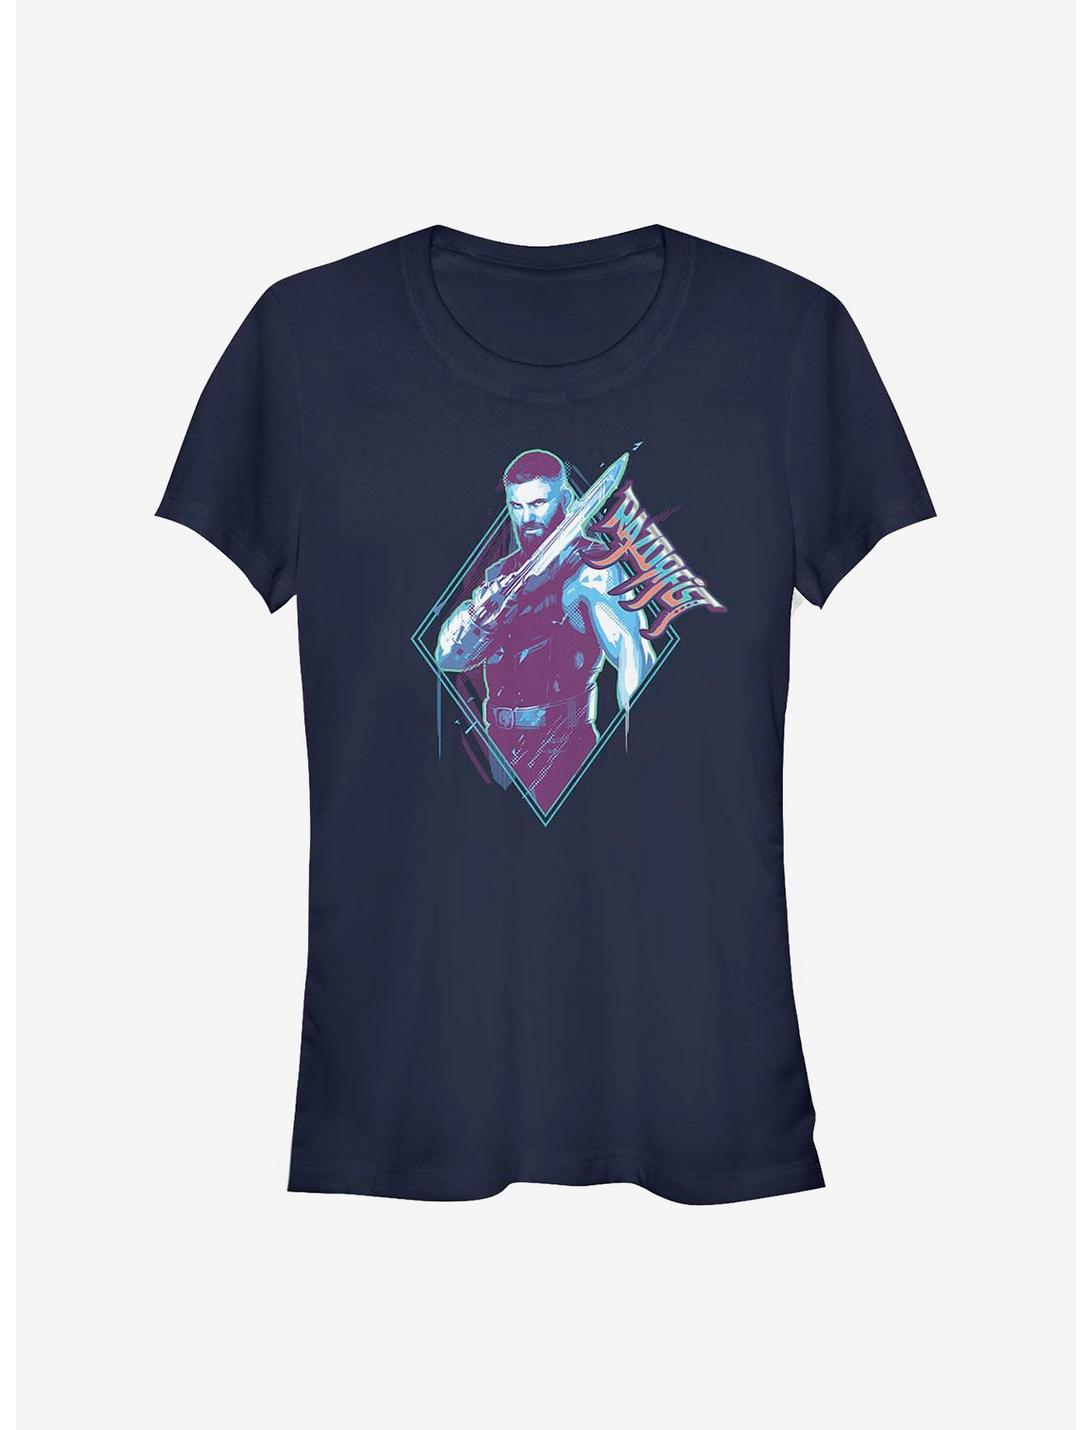 Marvel Shang-Chi And The Legend Of The Ten Rings Razorfist Badge Girls T-Shirt, NAVY, hi-res